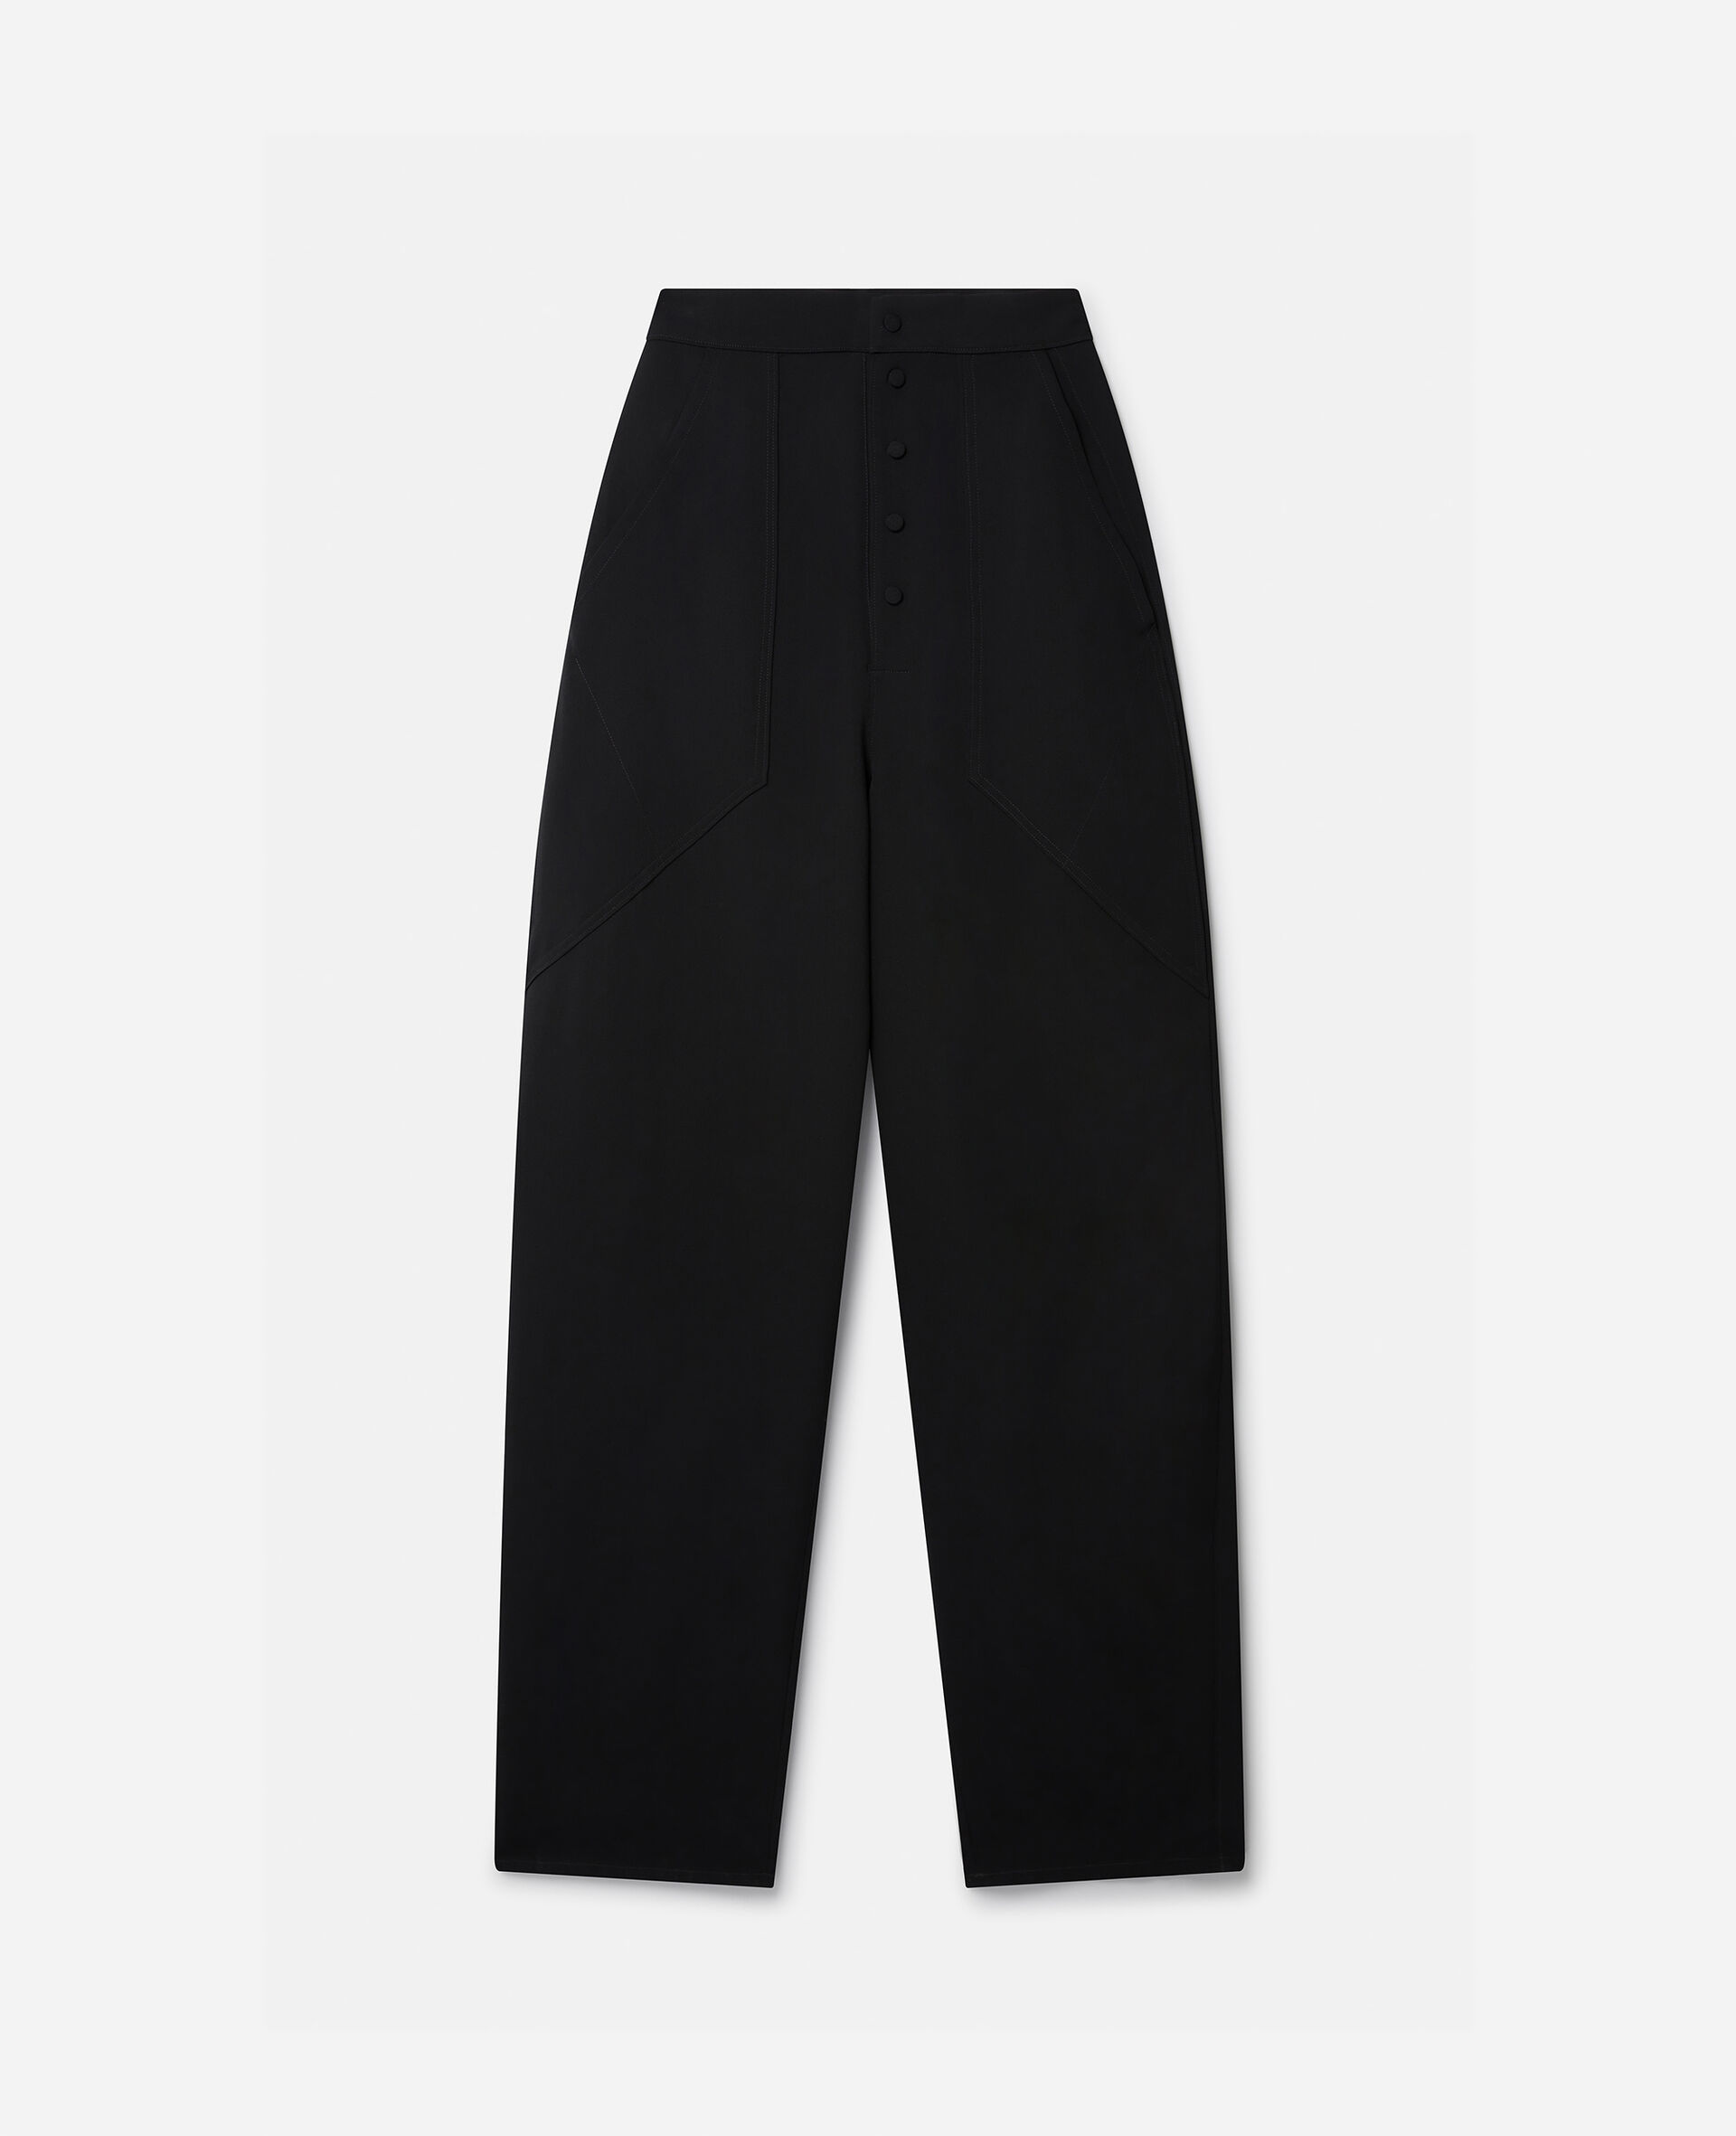 Loose Fit Tailored Trousers-Black-large image number 0